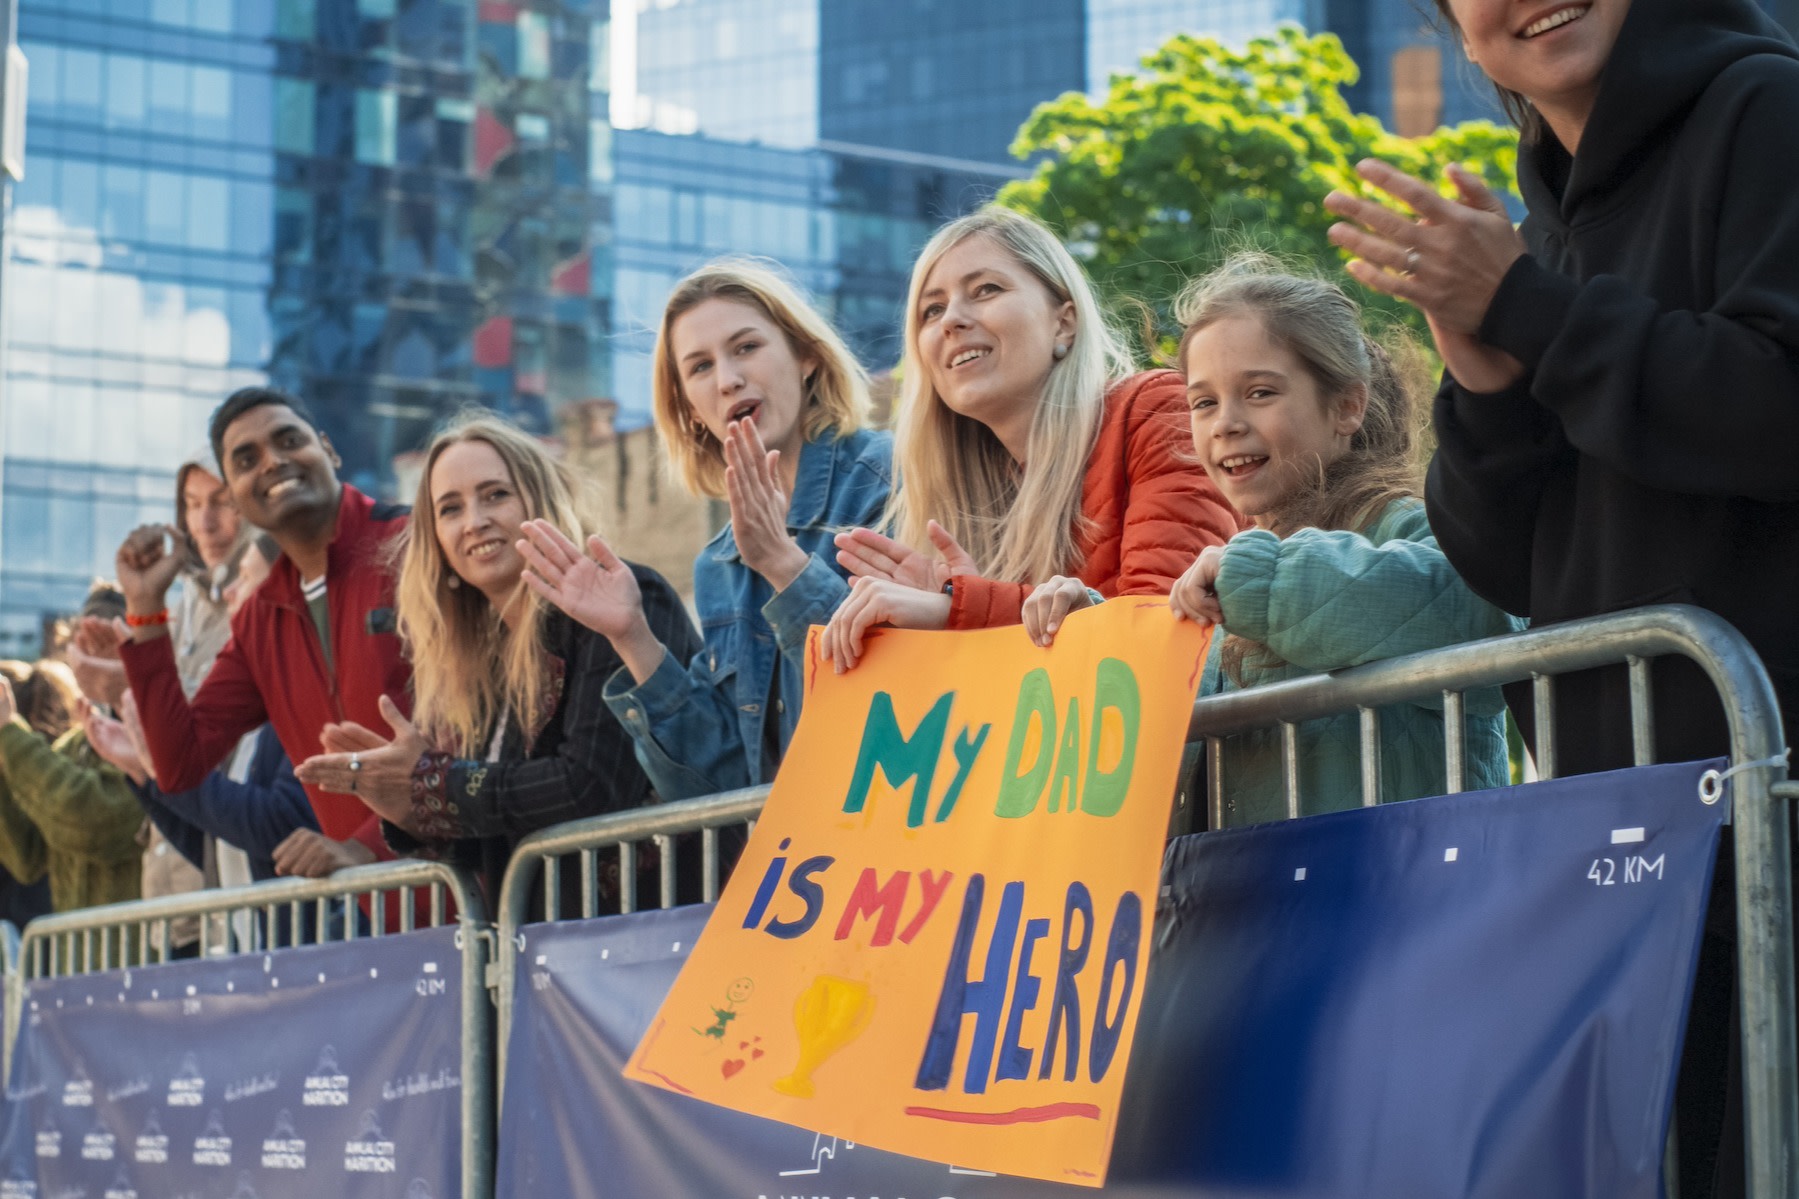 A line of spectators leaning up against a fence and cheering at a marathon. A little girl in the crowd is holding a colorful marathon sign that says "My dad is my hero."